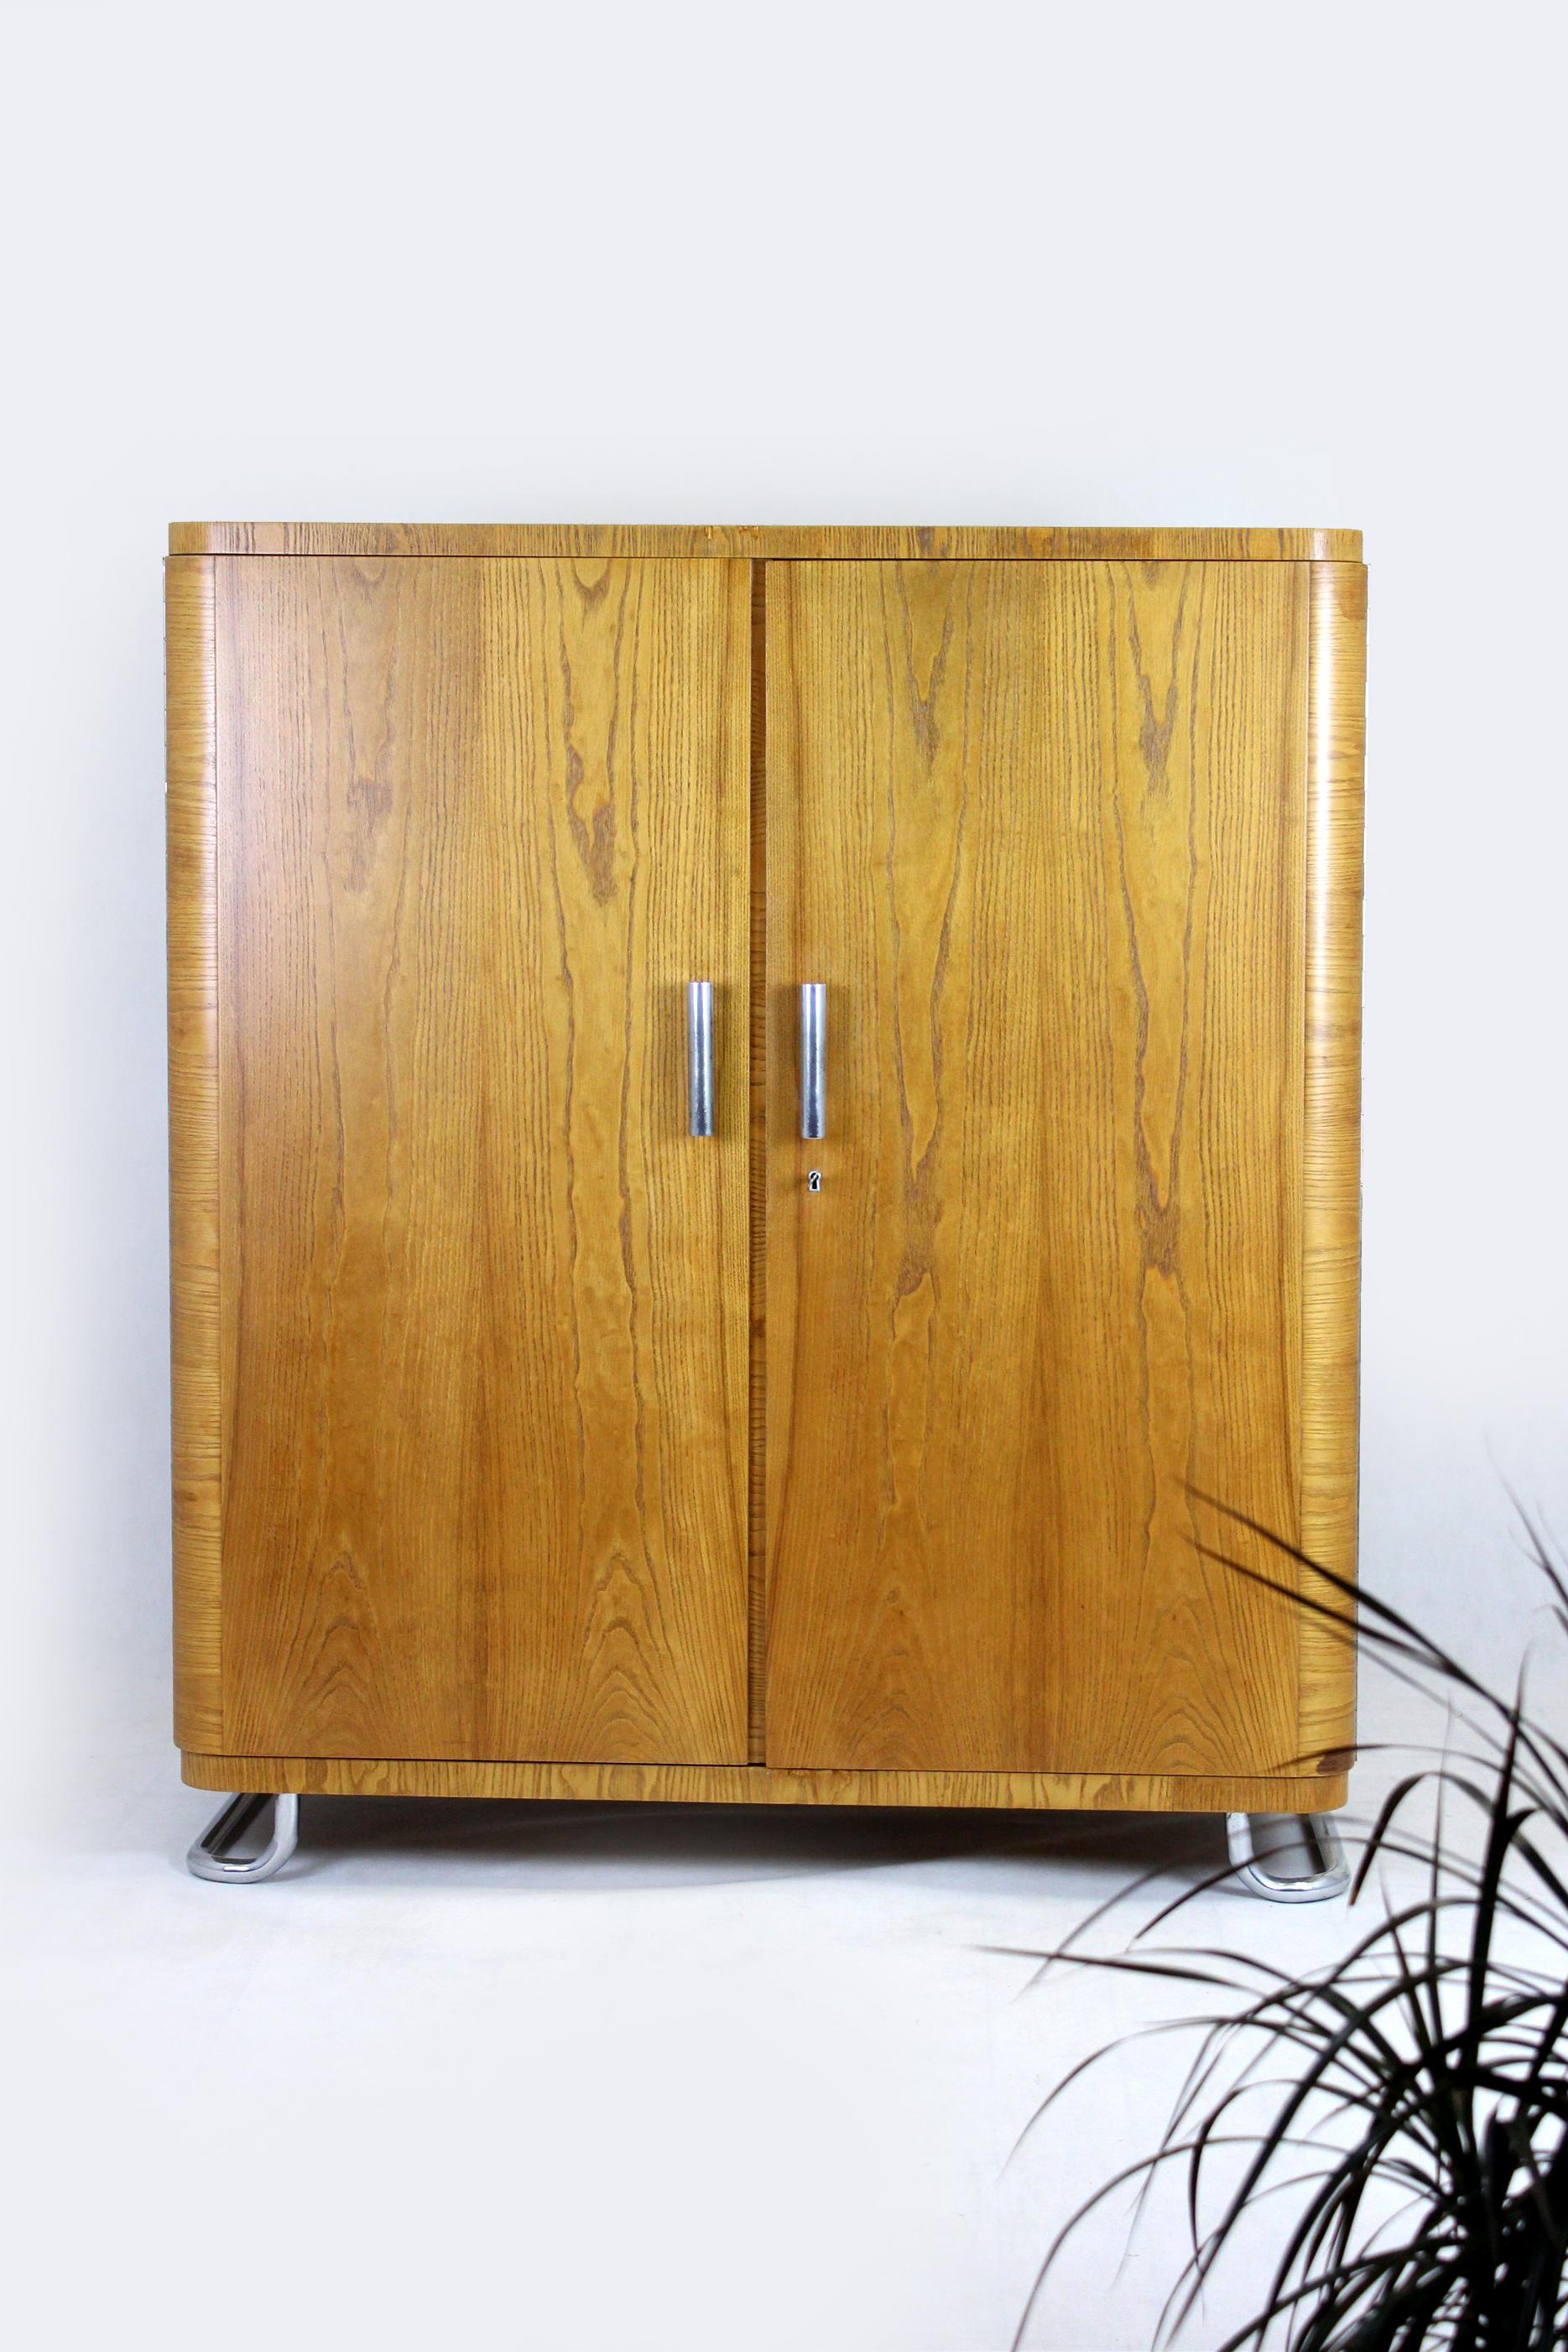 This Bauhaus-style wardrobe was produced by Hynek Gottwald in Czechoslovakia in the 1930s. 
Features two doors and three shelves. The wardrobe stands on chromed feet and has chromed cylinder handles. 
Very good condition, clean.